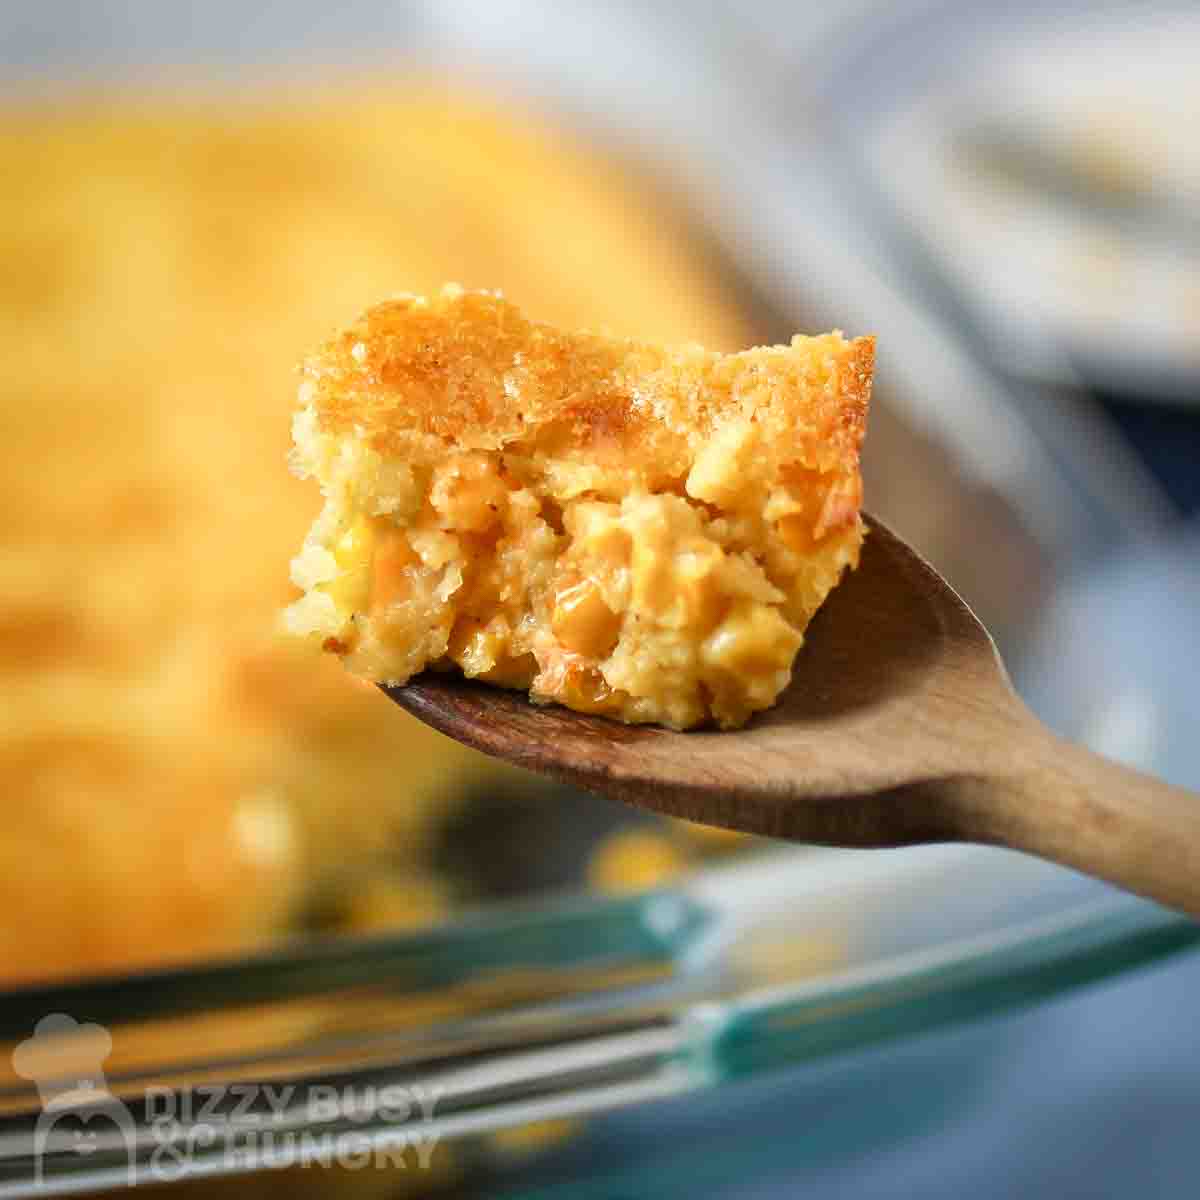 Close up view of a mouthful of corn casserole on a wooden spoon with the casserole dish in the backgroundClose up view of a mouthful of cornbread casserole on a wooden spoon with the casserole dish in the background